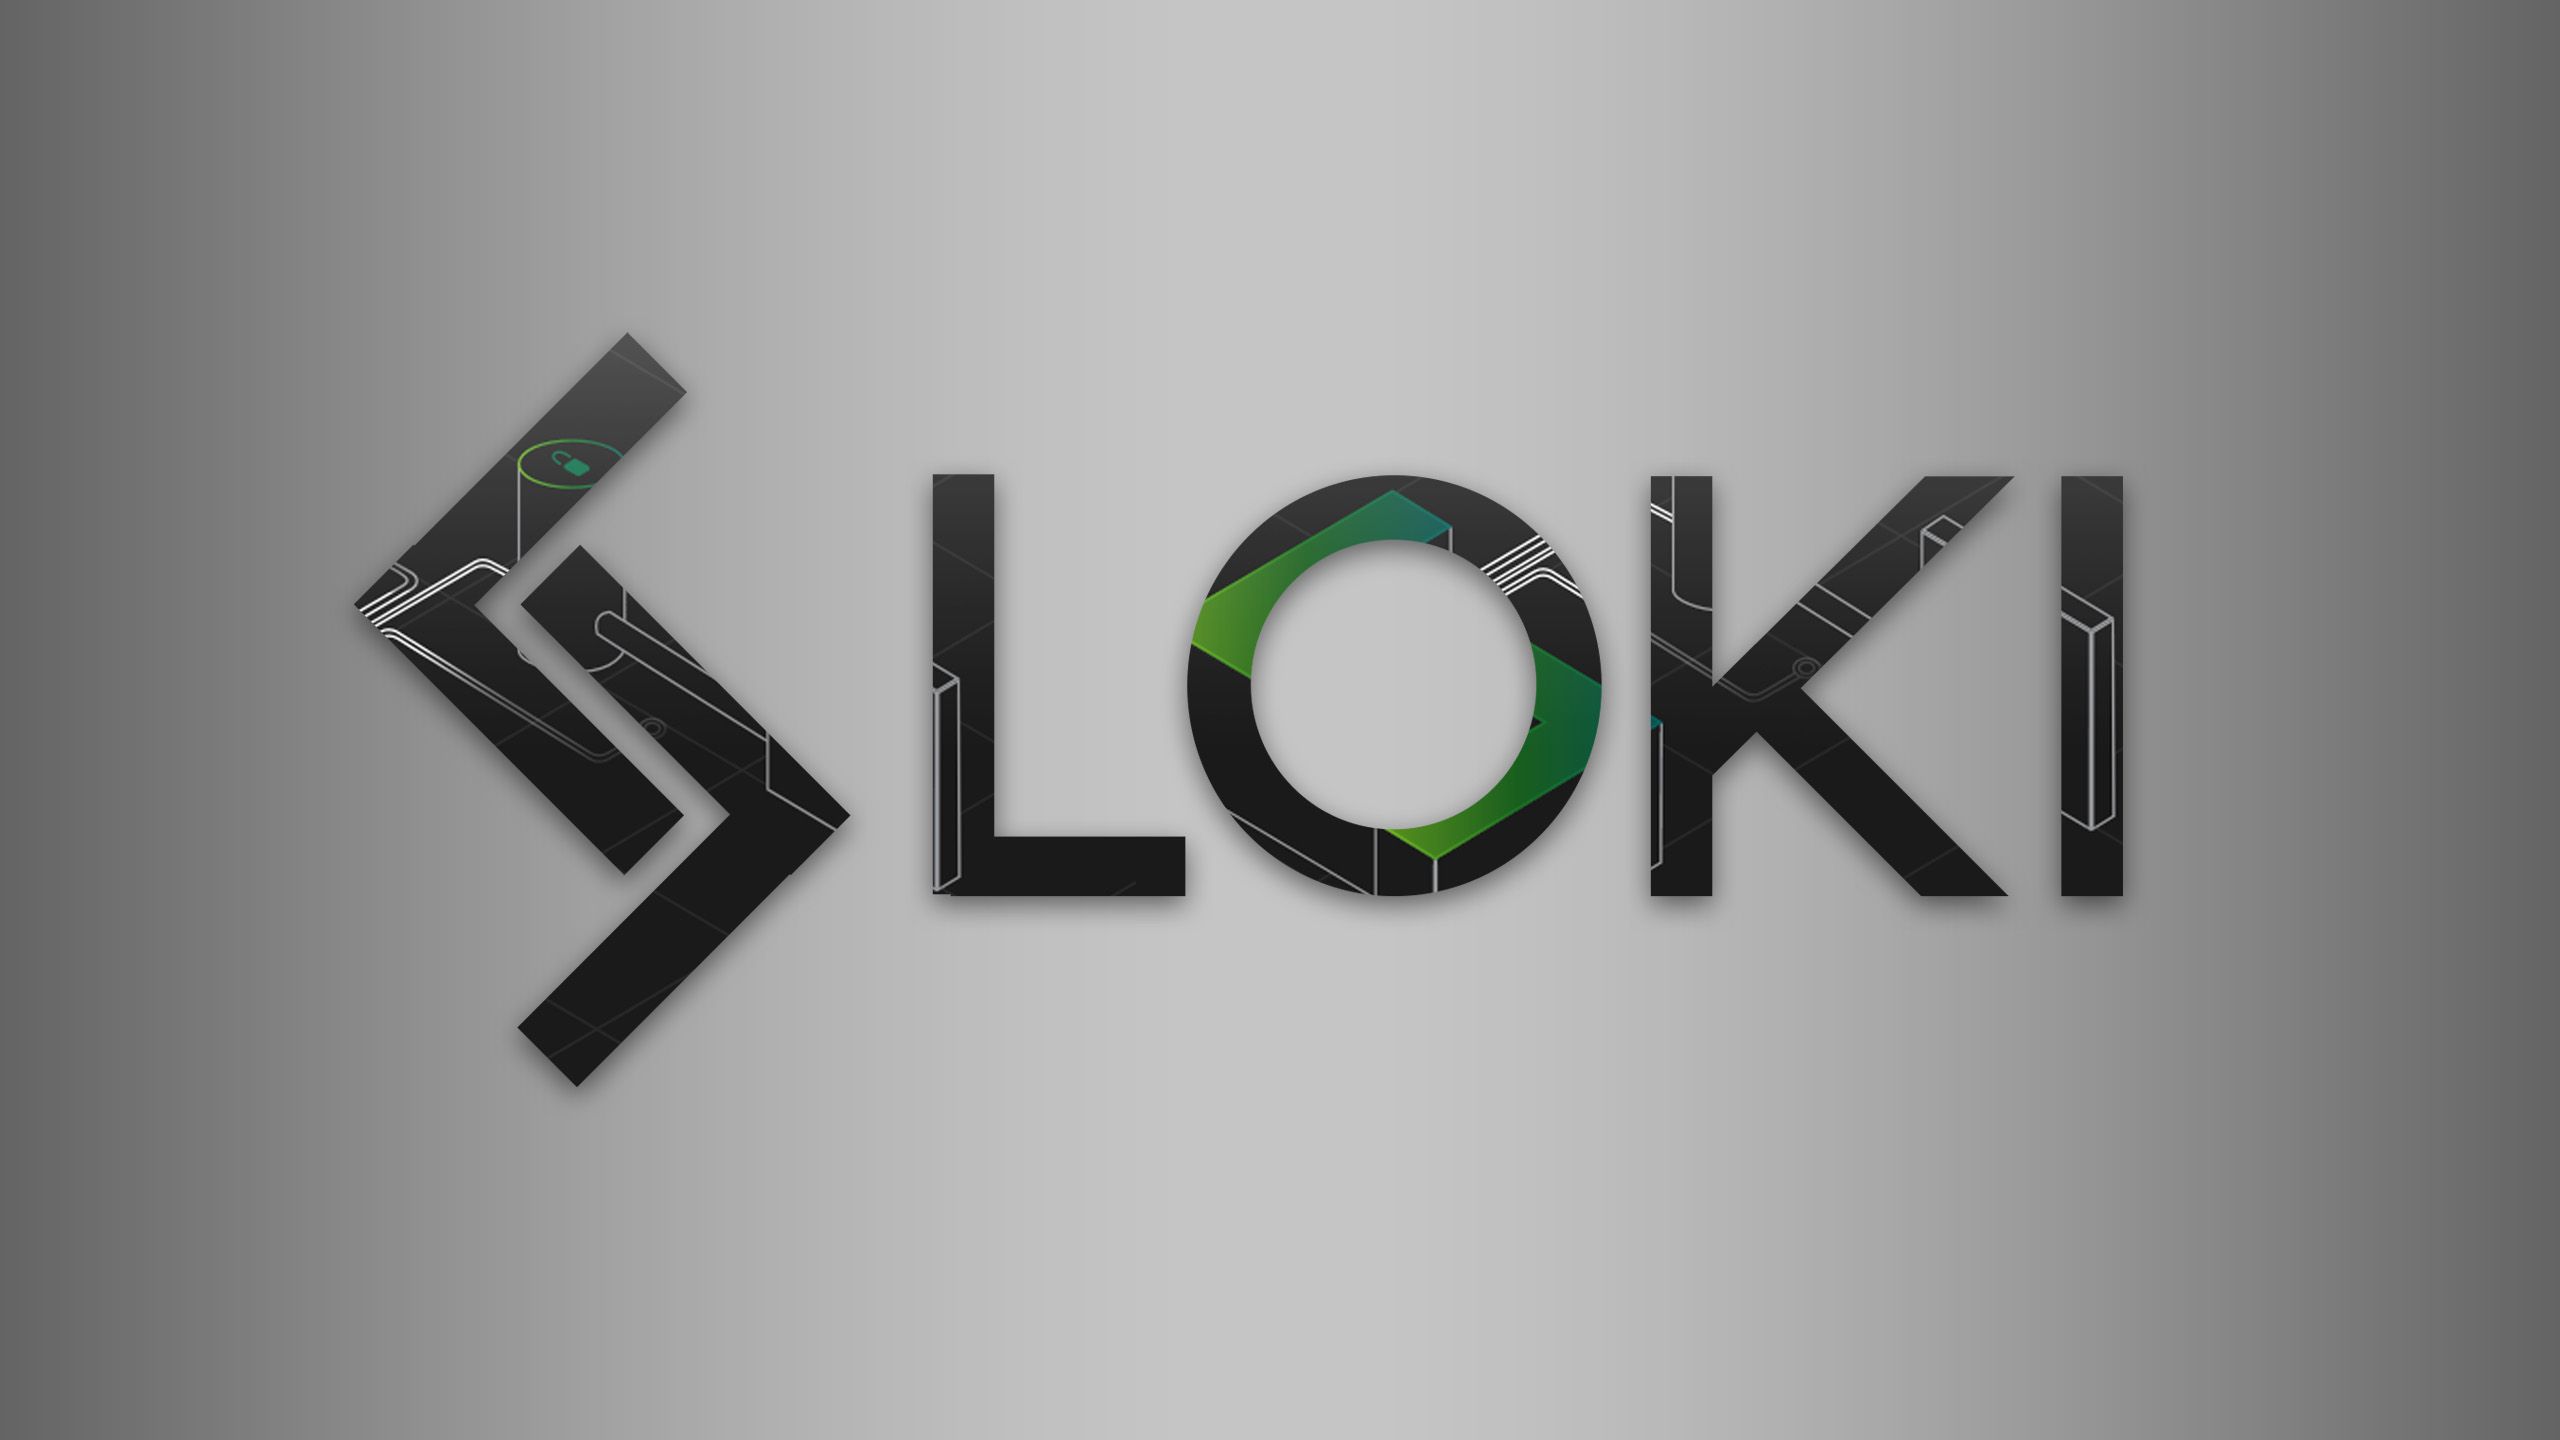 Loki Wallpaper Contest, Retweet and Comment!